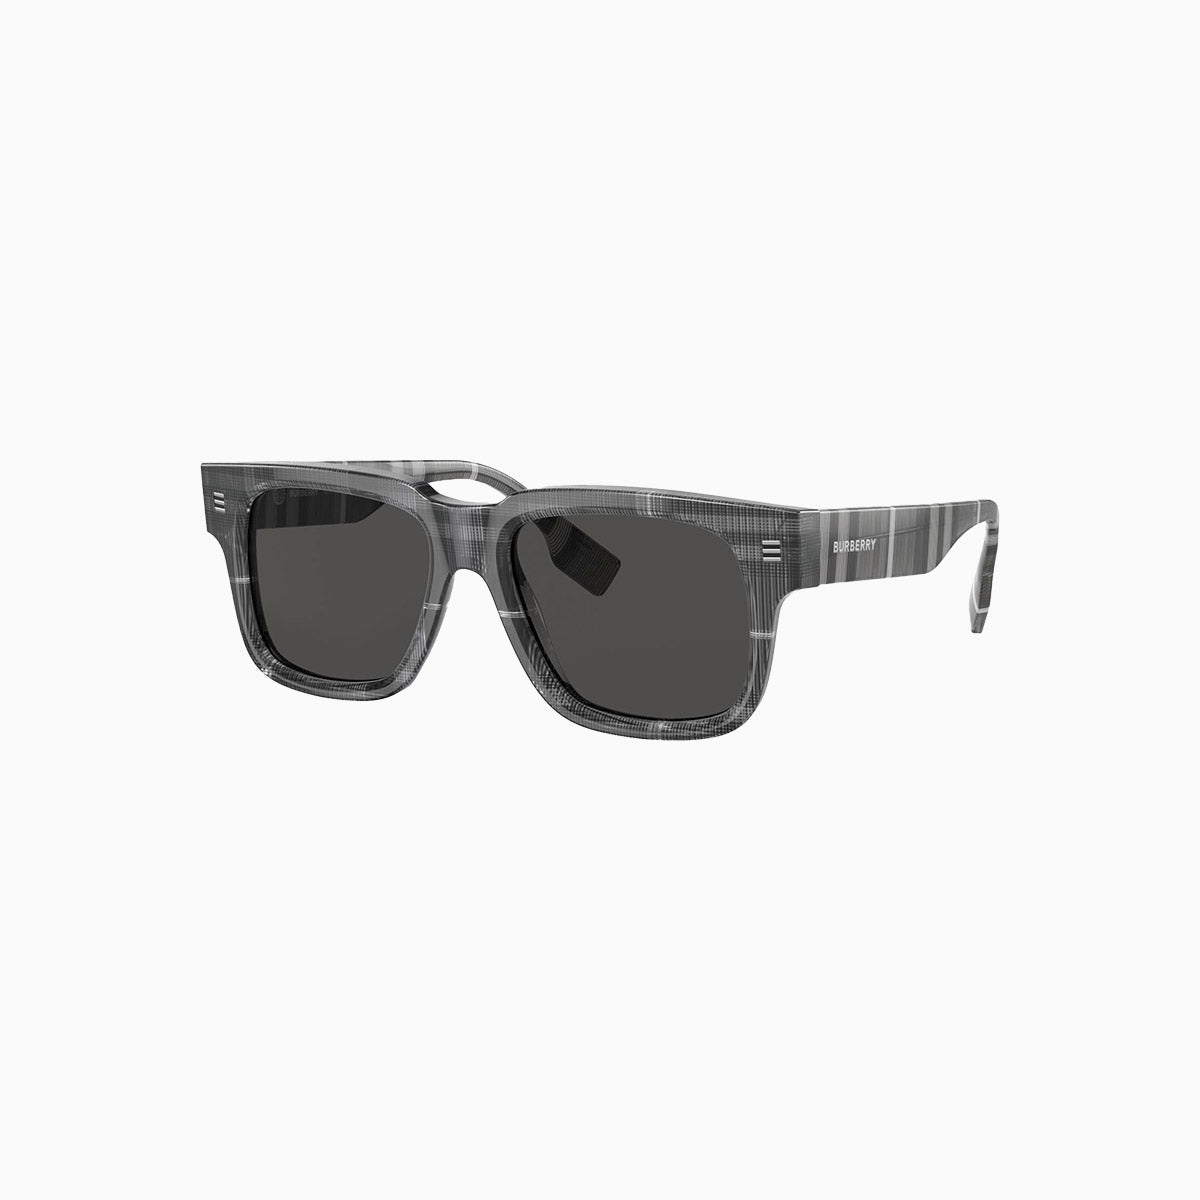 burberry-mens-burberry-charcoal-check-sunglasses-0be4394-380487